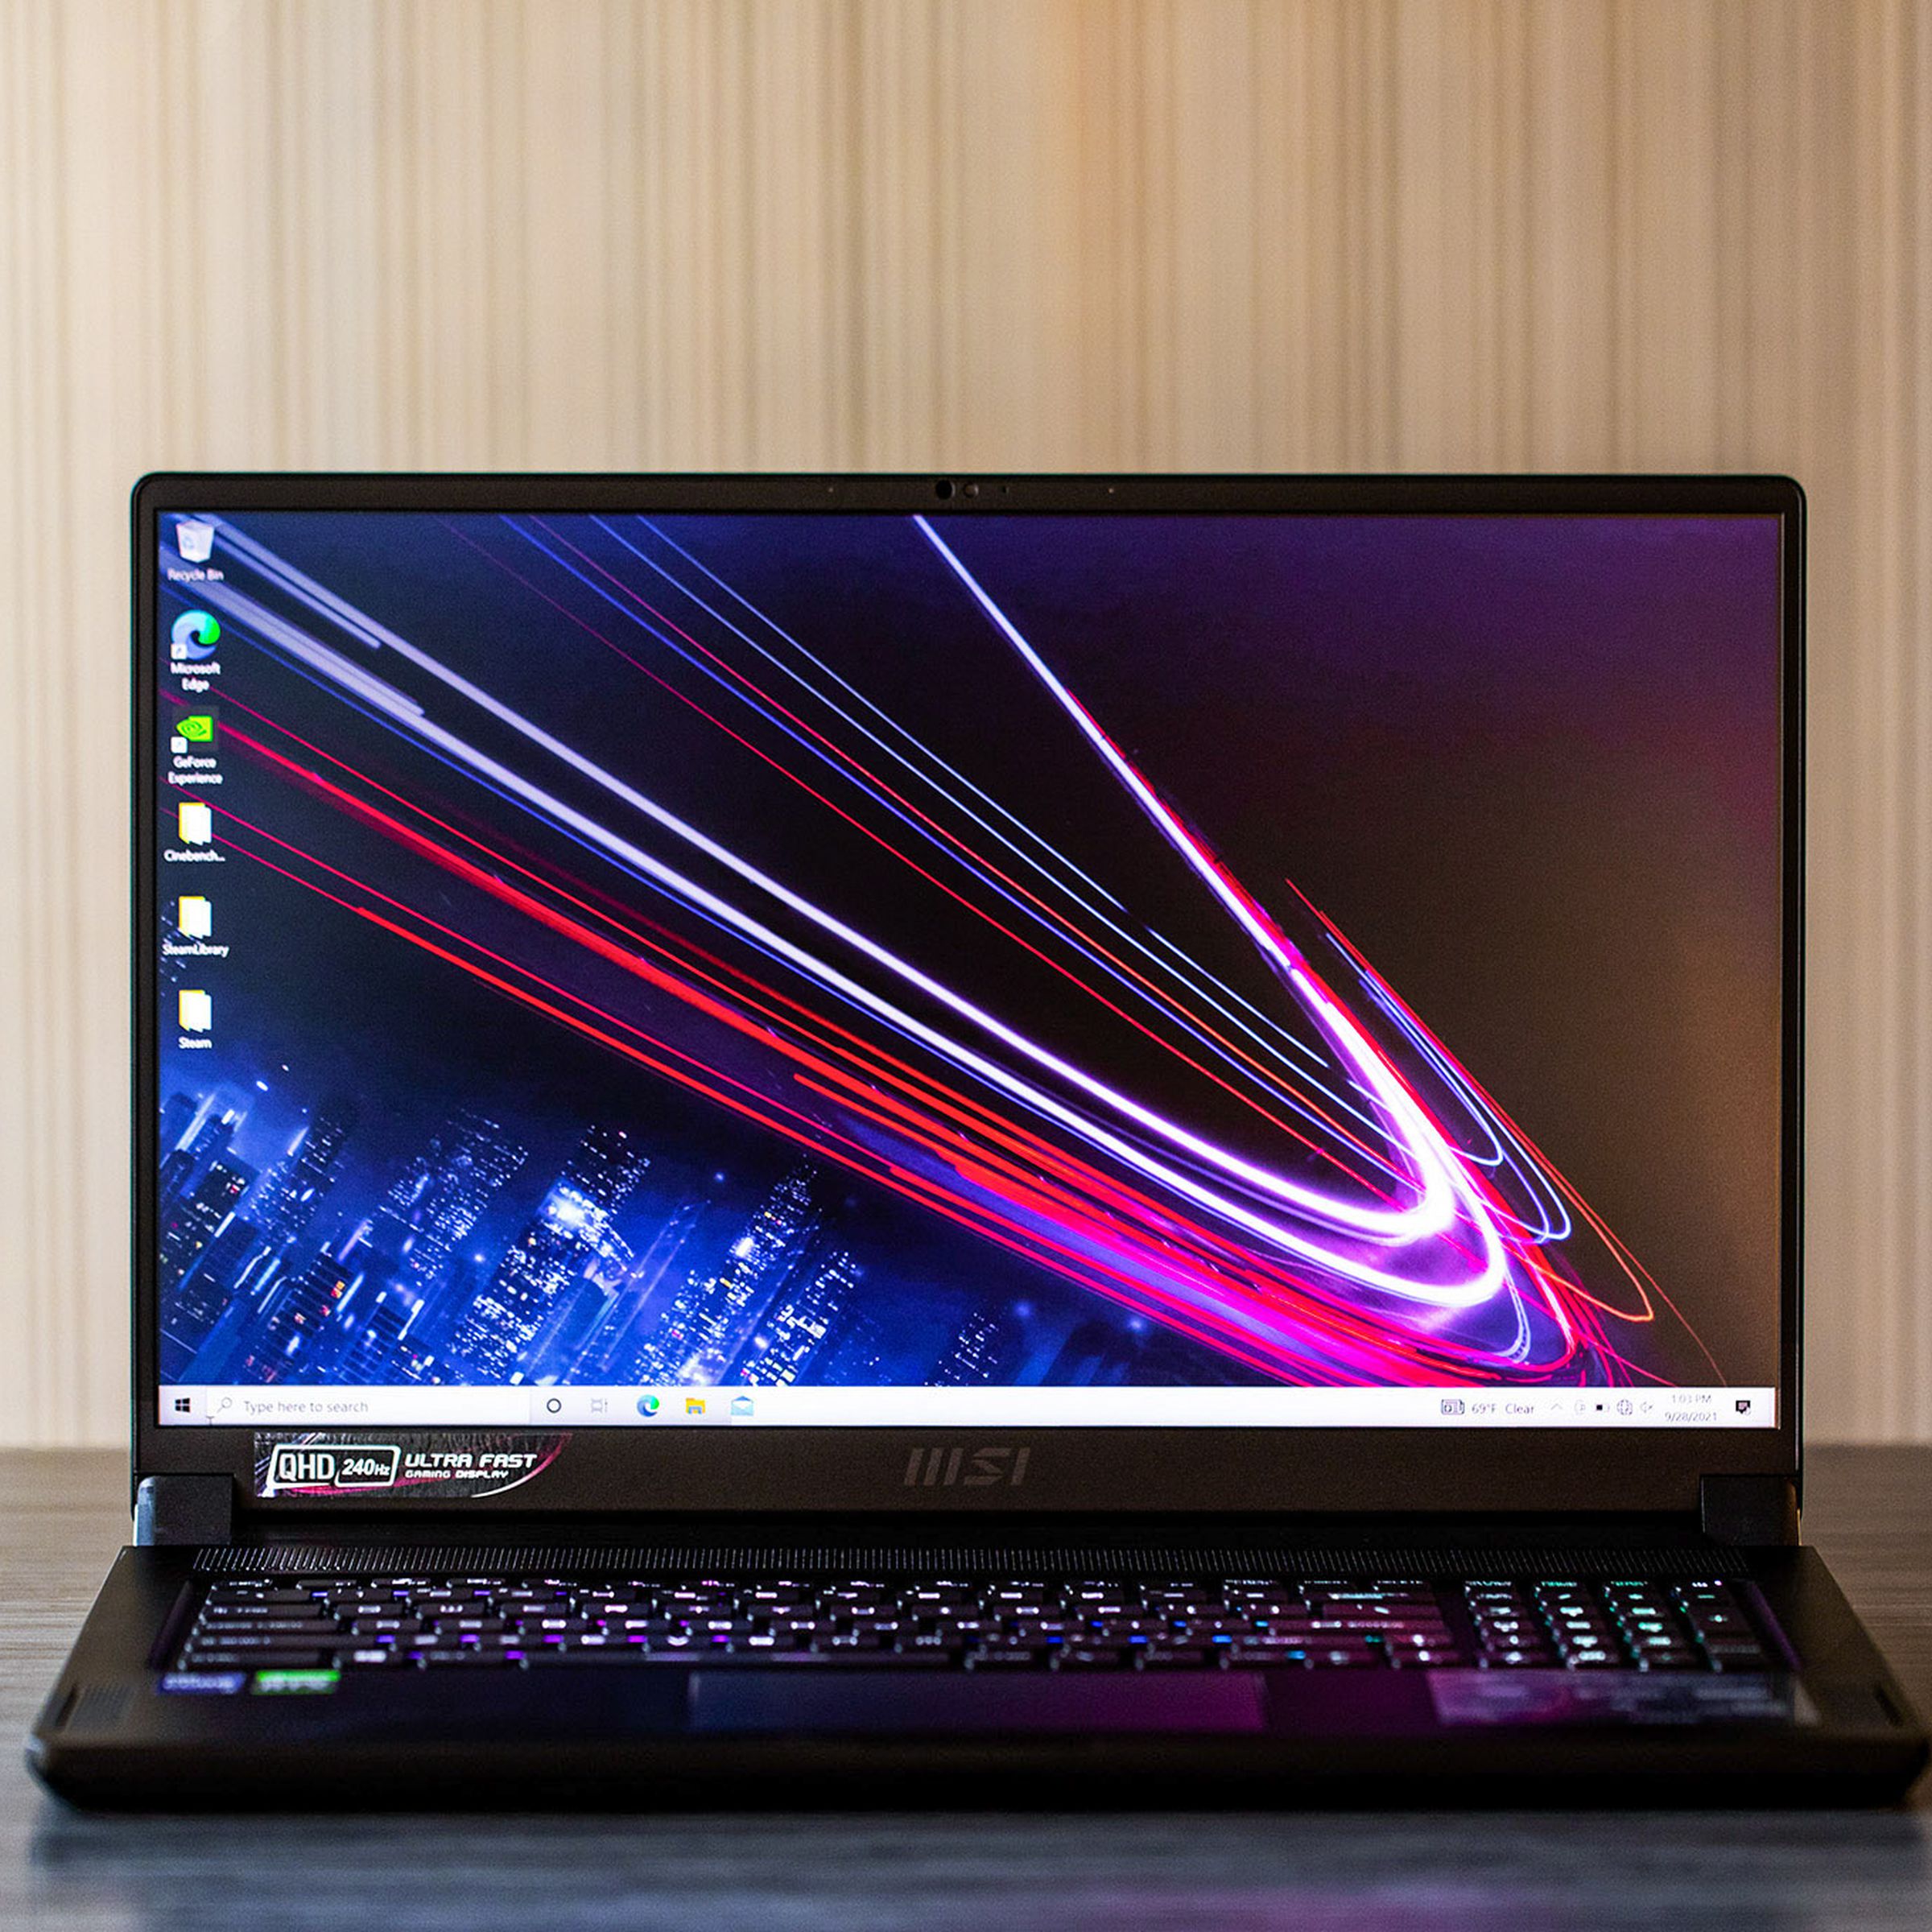 The MSI GS76 Stealth on a table, open. The screen displays a blue and dark red background.